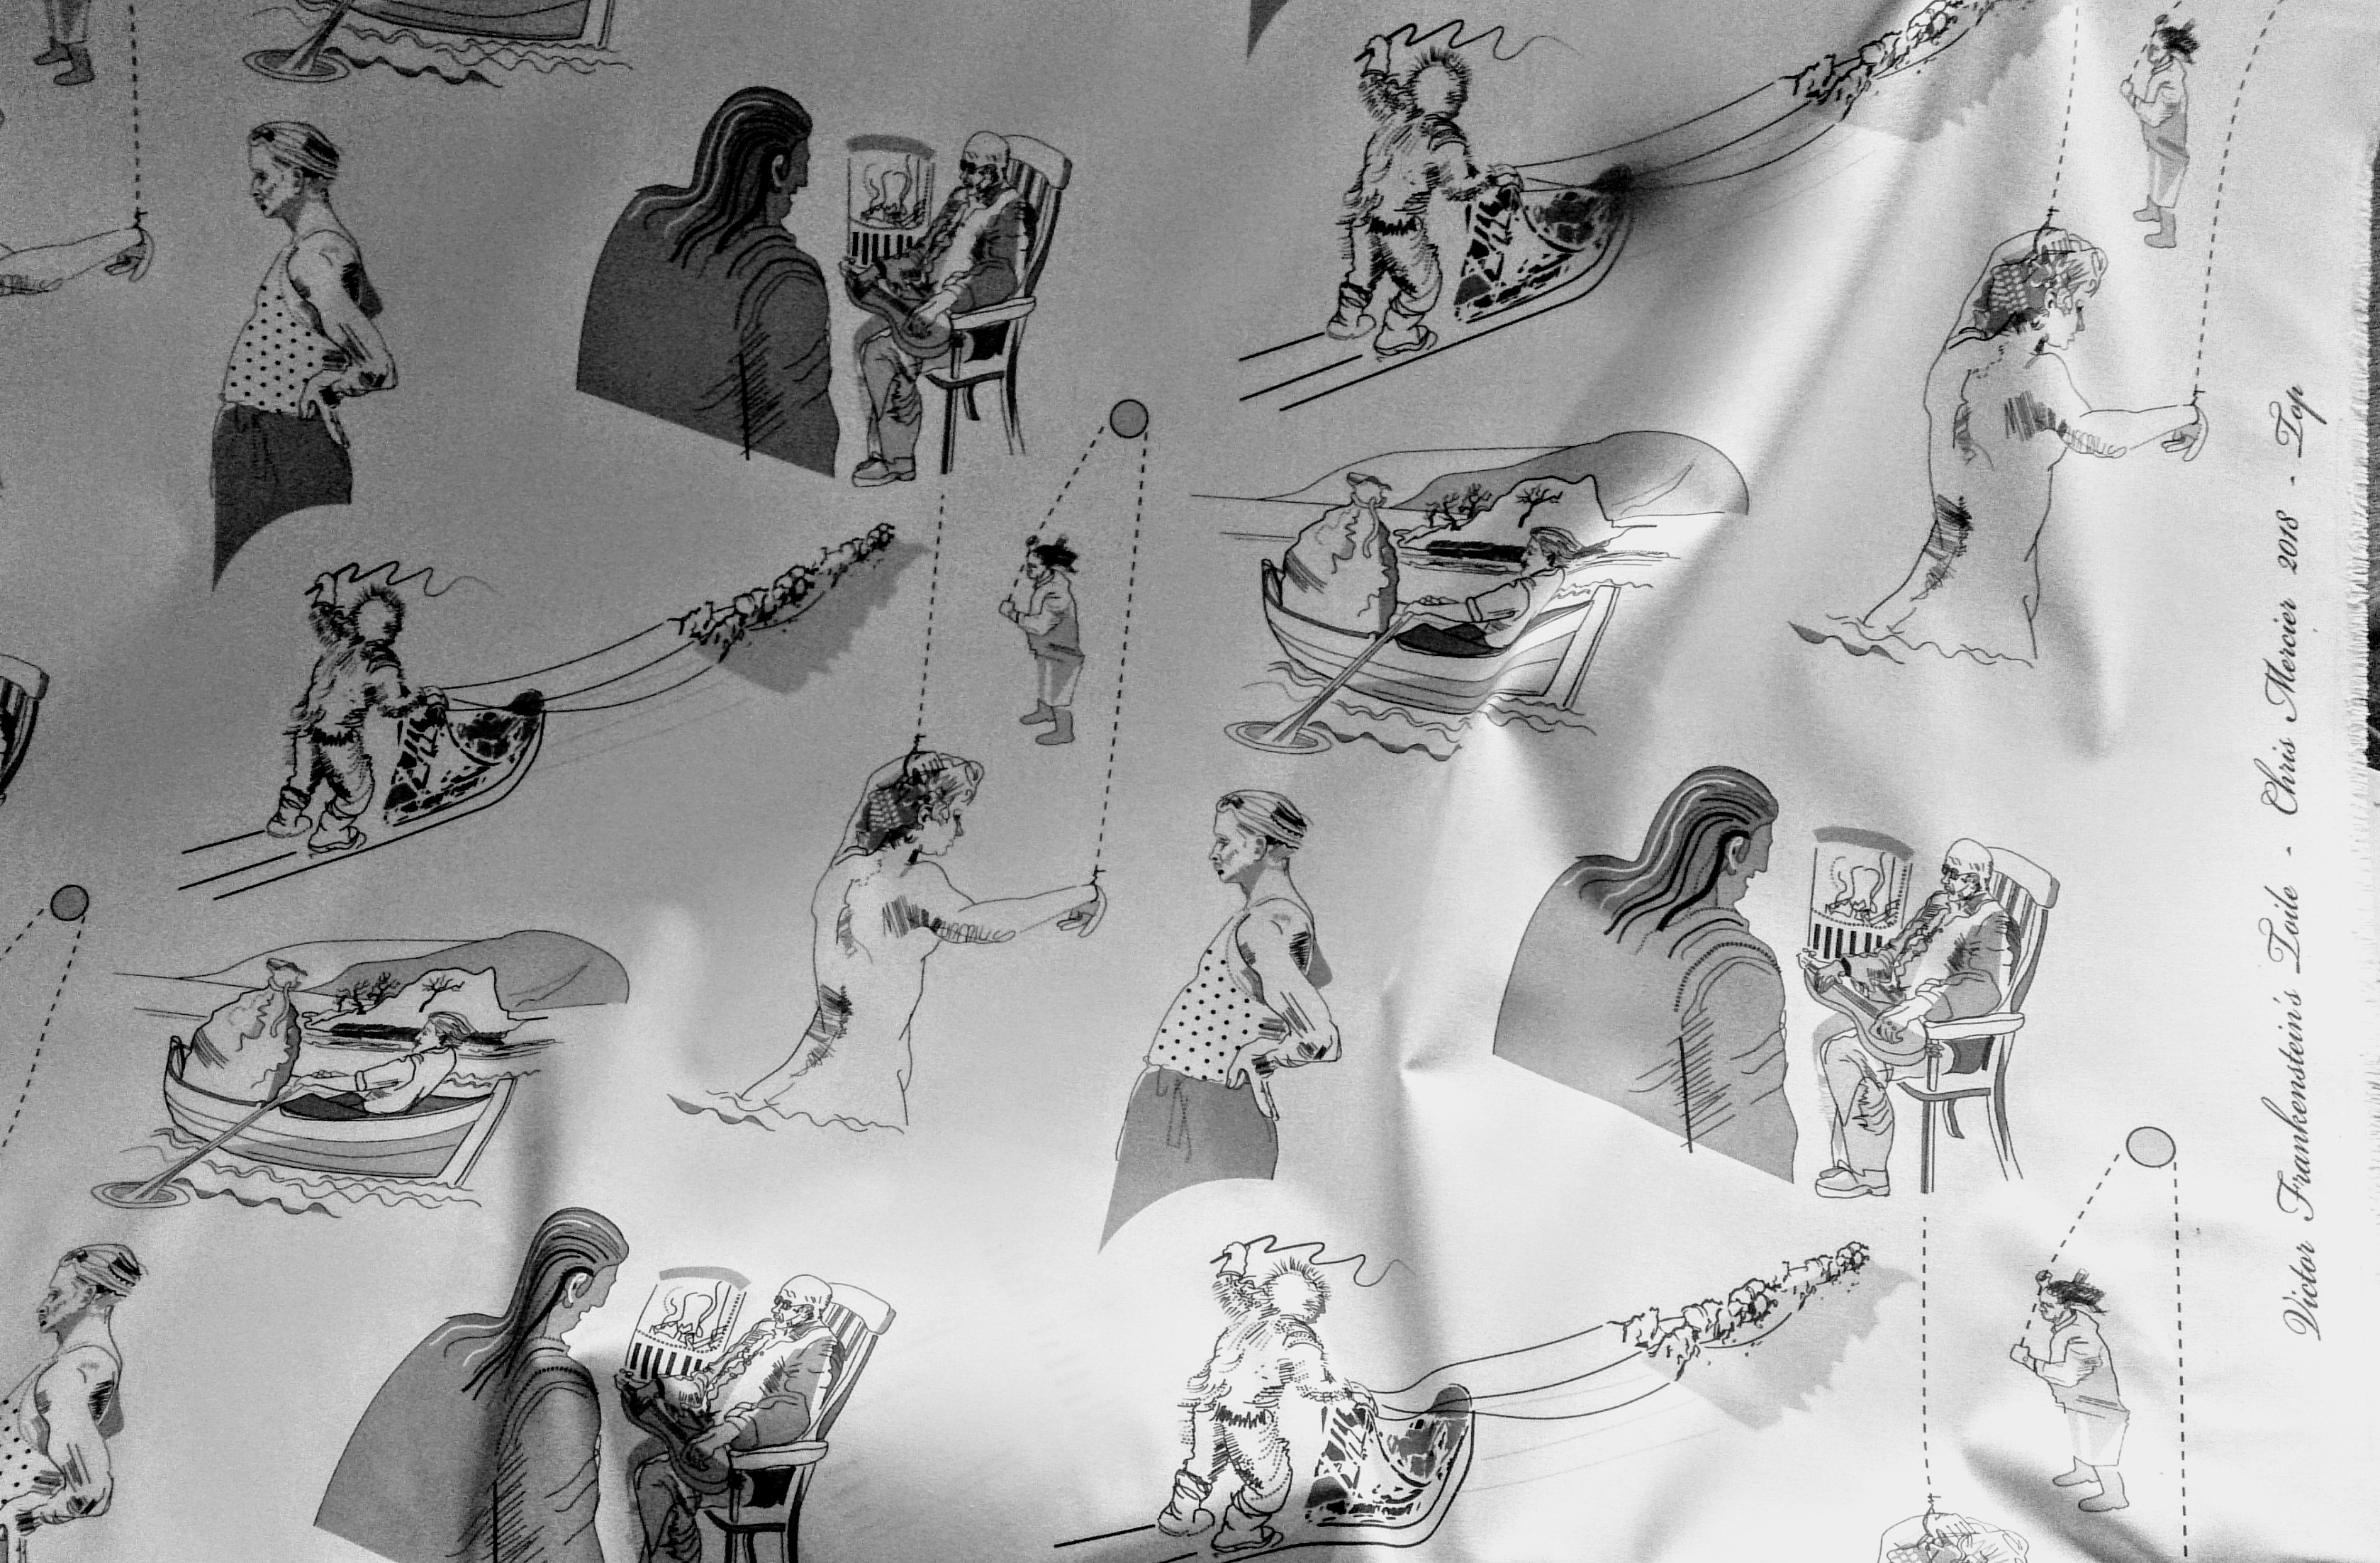 ToileFabric, The Frankenstein’s Toile digitally printed on cotton fabric by Chris Mercier.